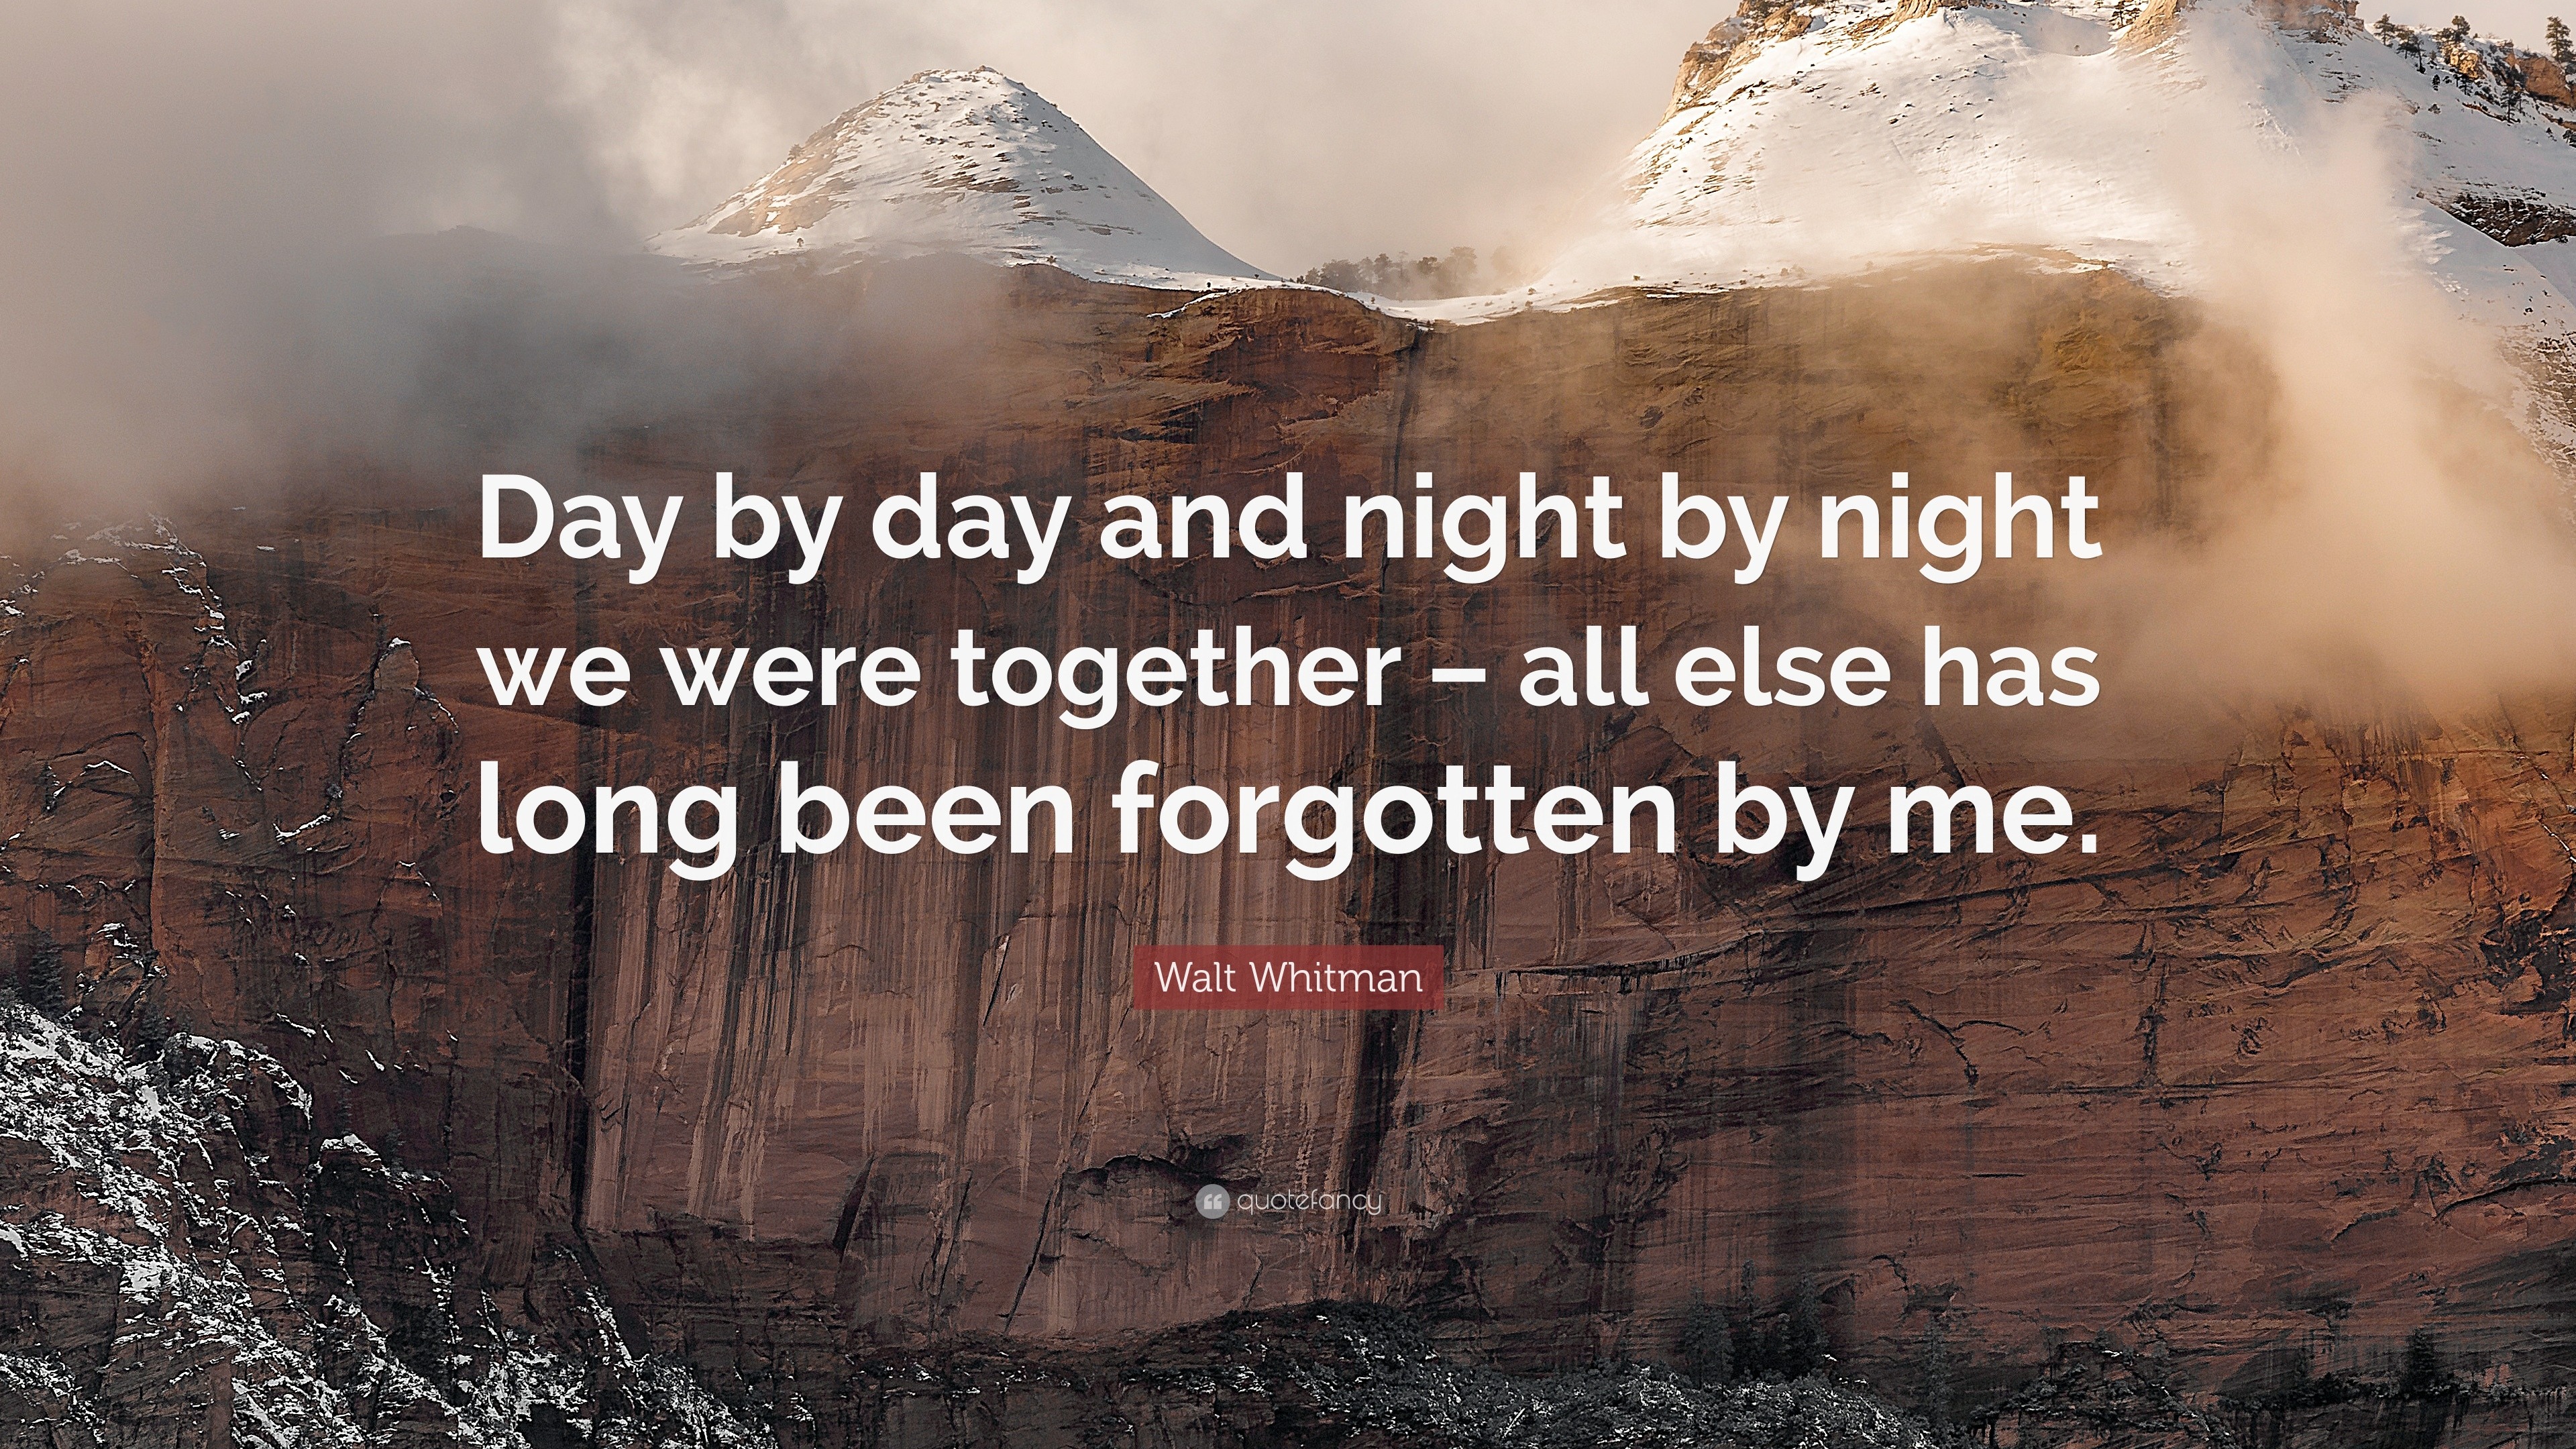 Walt Whitman Quote “Day by day and night by night we were together